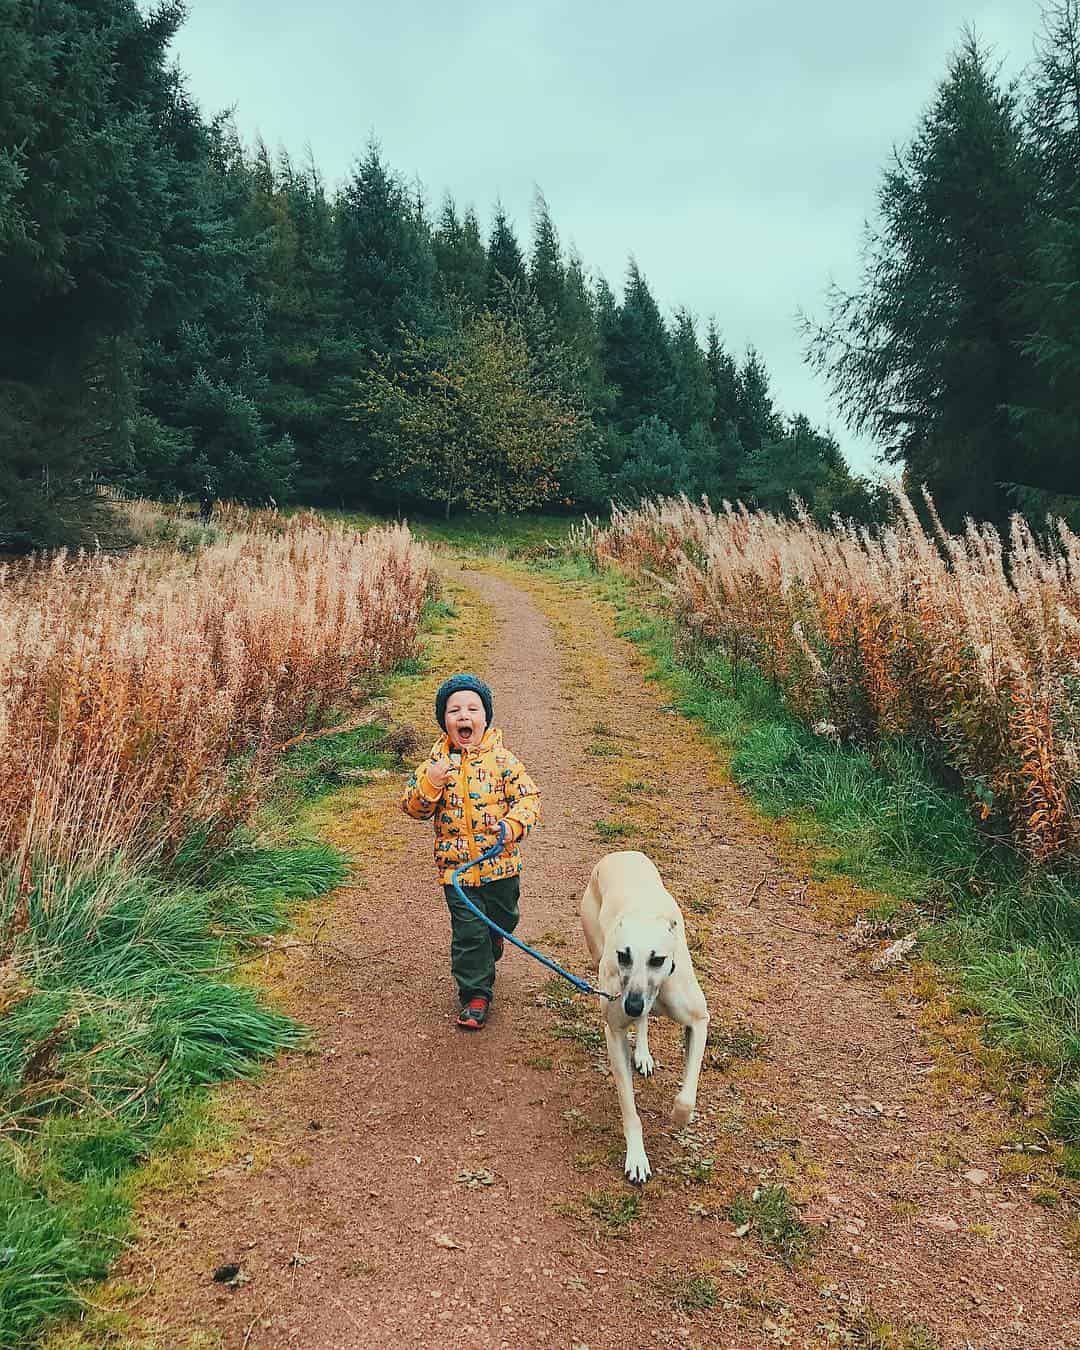 animals get kids outdoors more and into nature